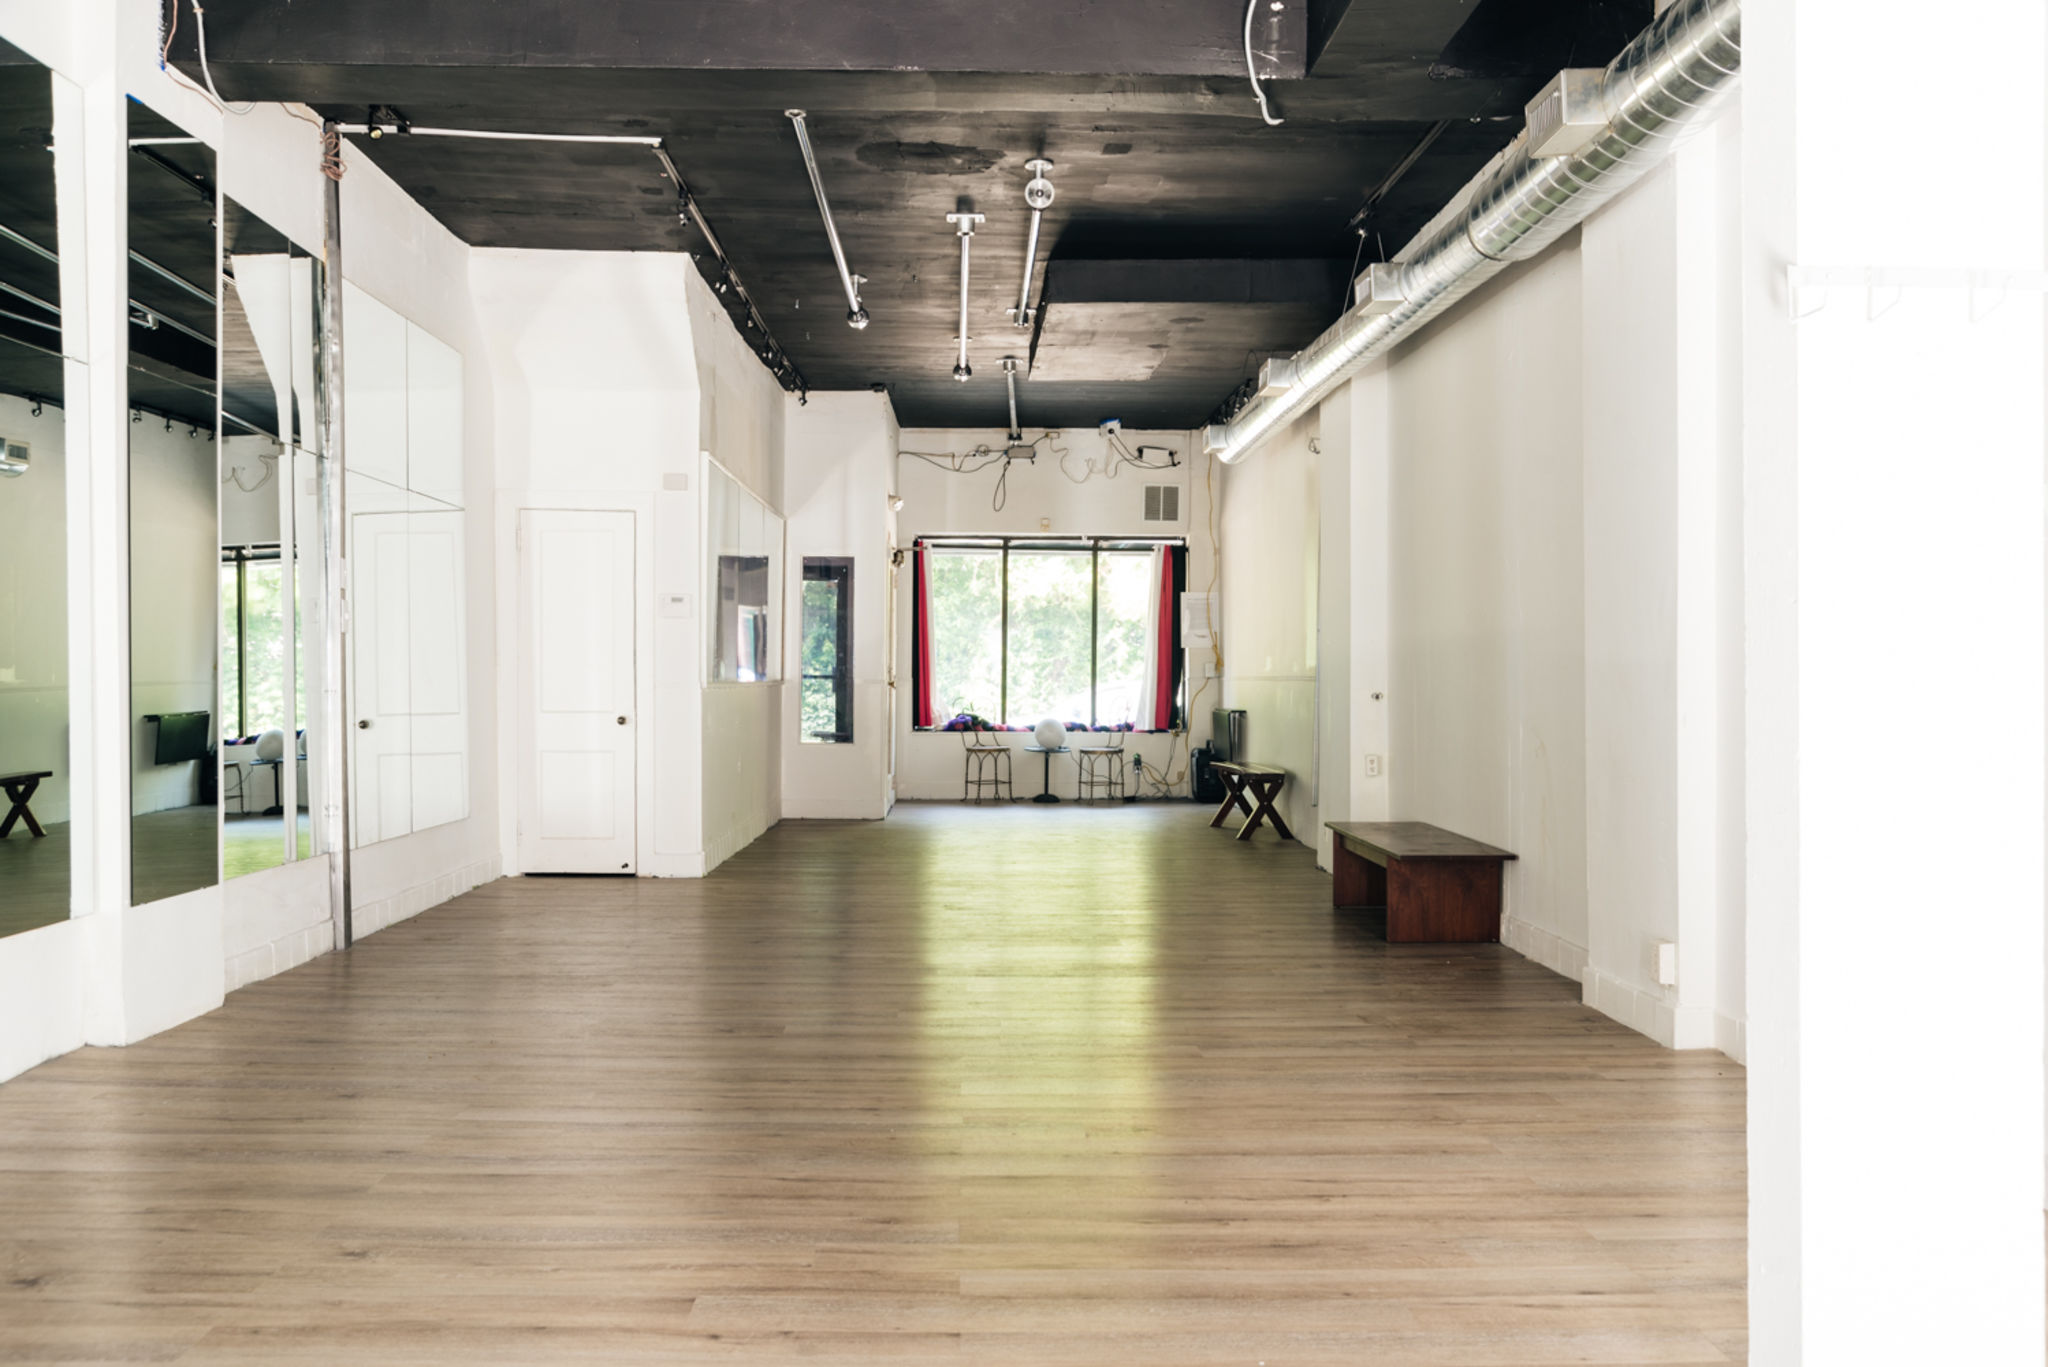 How Much Does It Cost to Rent a Yoga Studio? - Peerspace